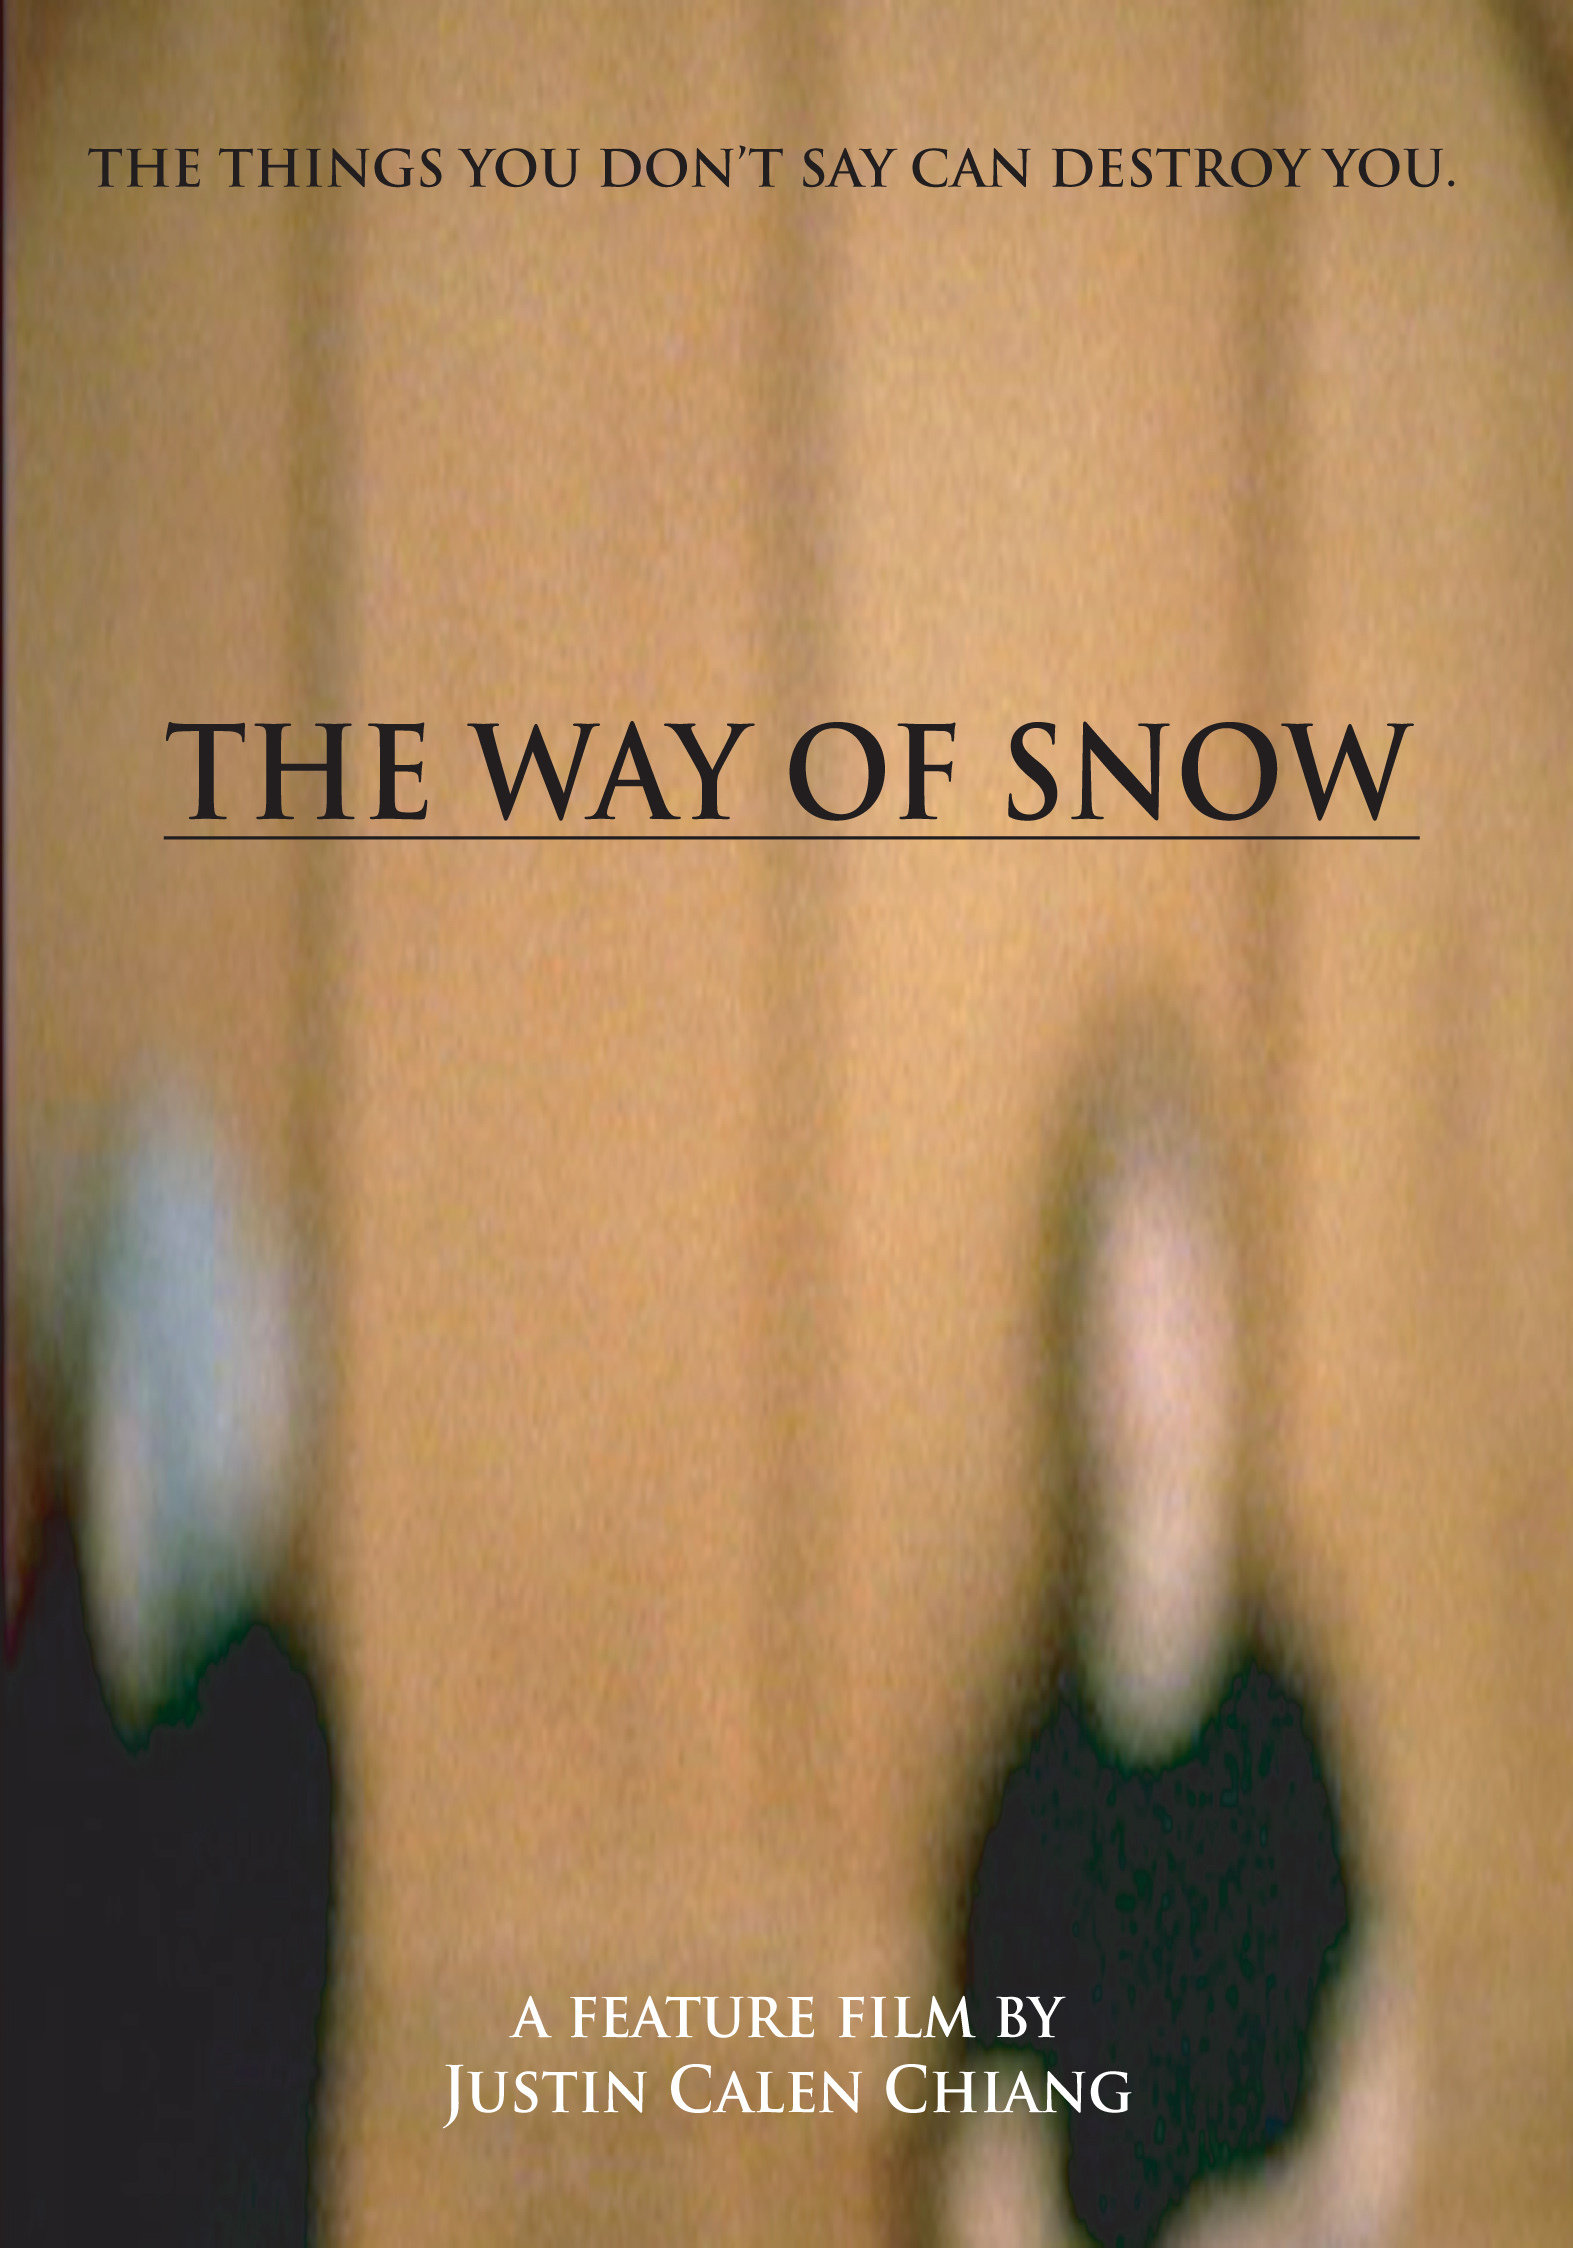 THE WAY OF SNOW. 2010, The Re-Vamp.